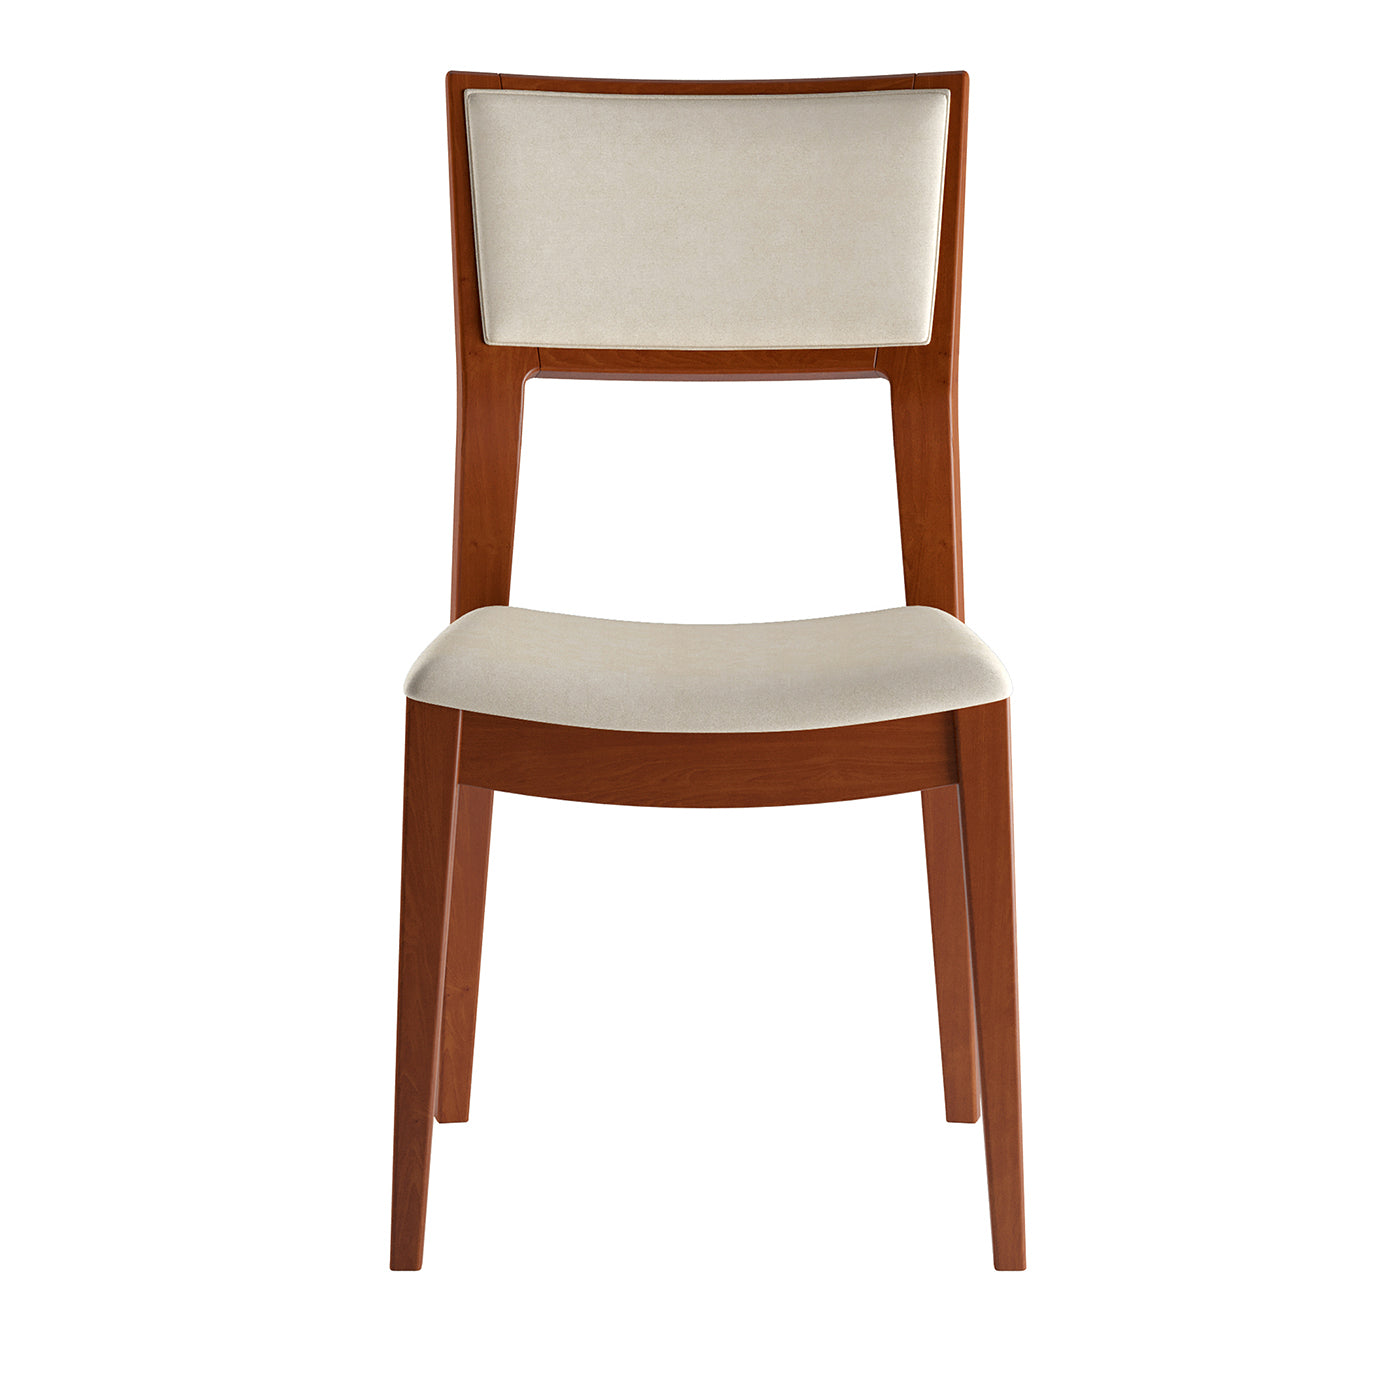 Dom5 Set of 2 Beige Chairs - Main view